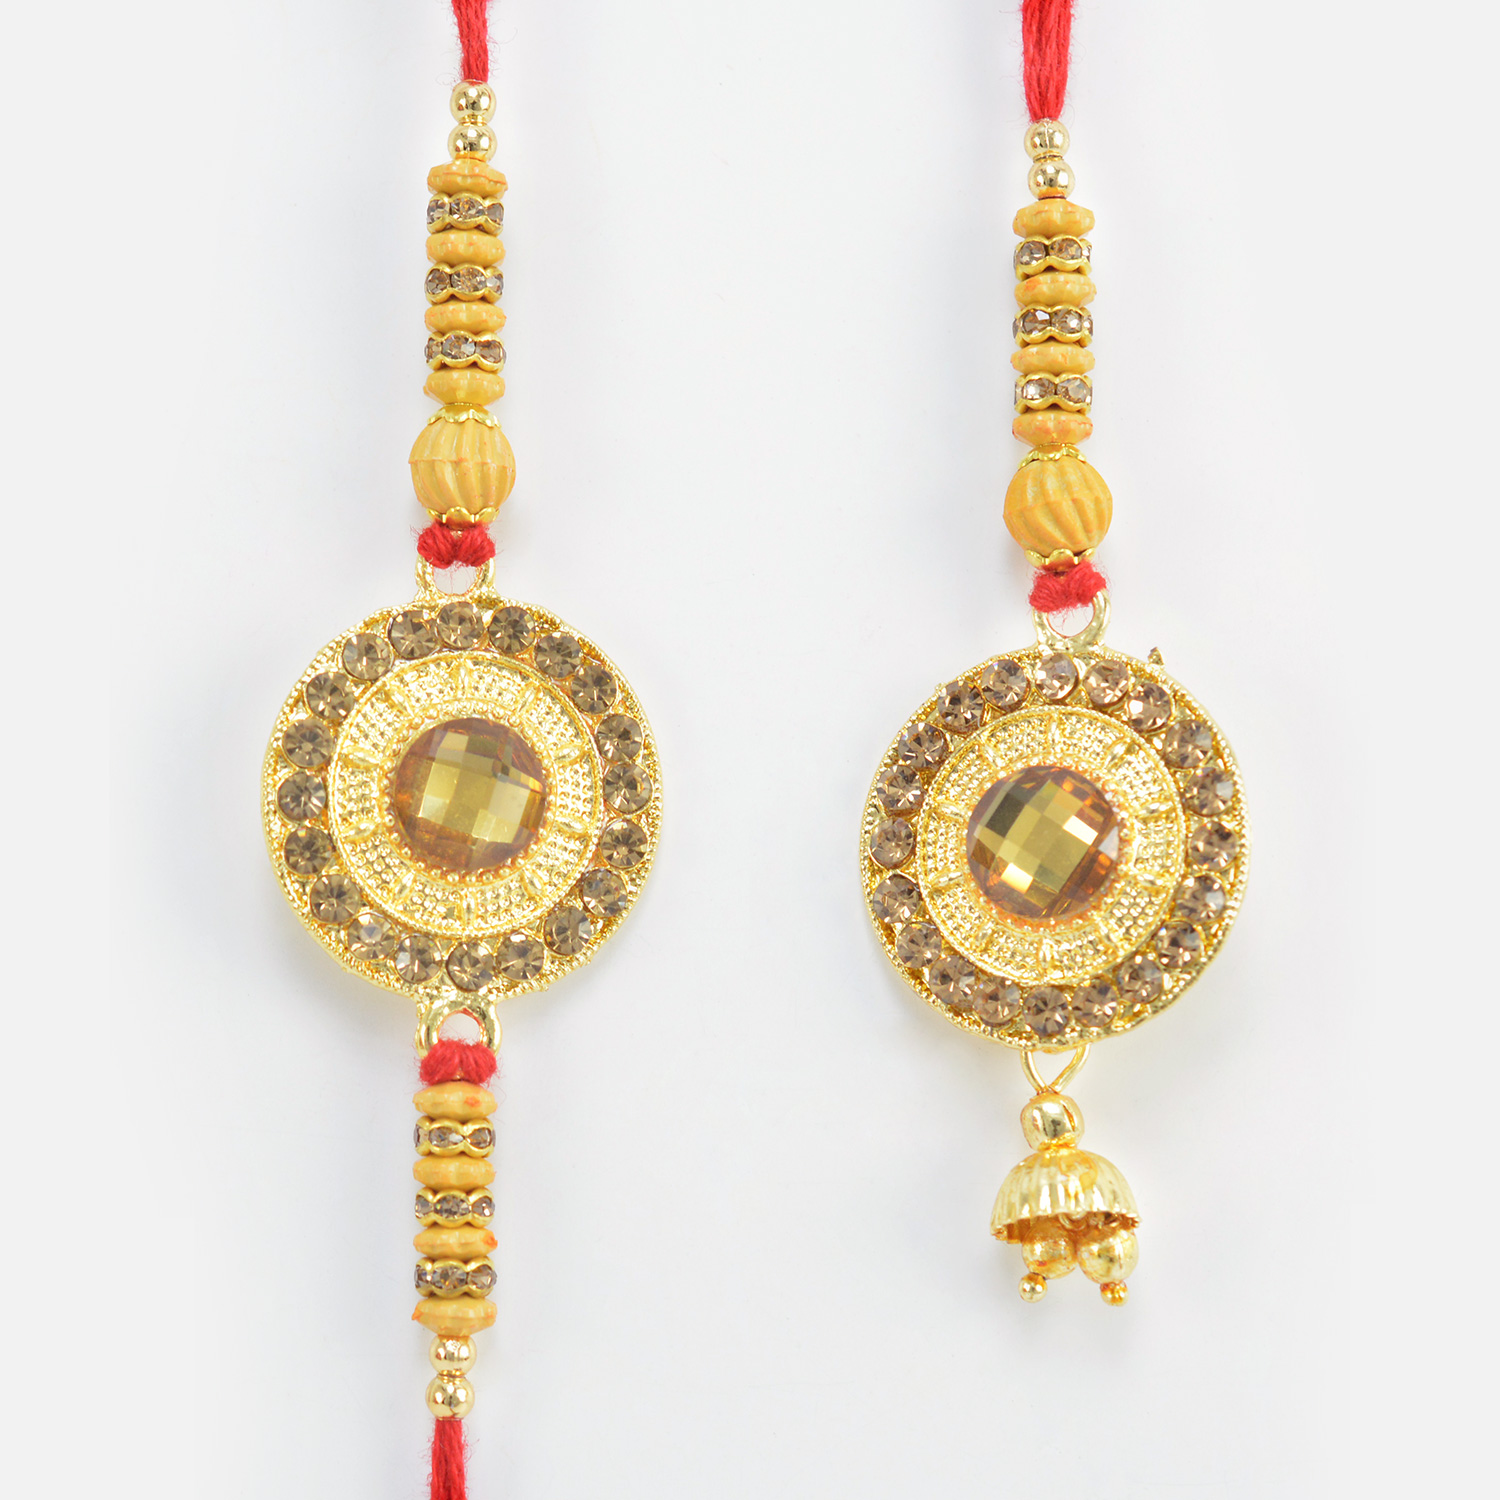 Kundan Crafted in Mid Coin Shape Rakhi for Brother with Lumba Rakhi for Bhabhi 